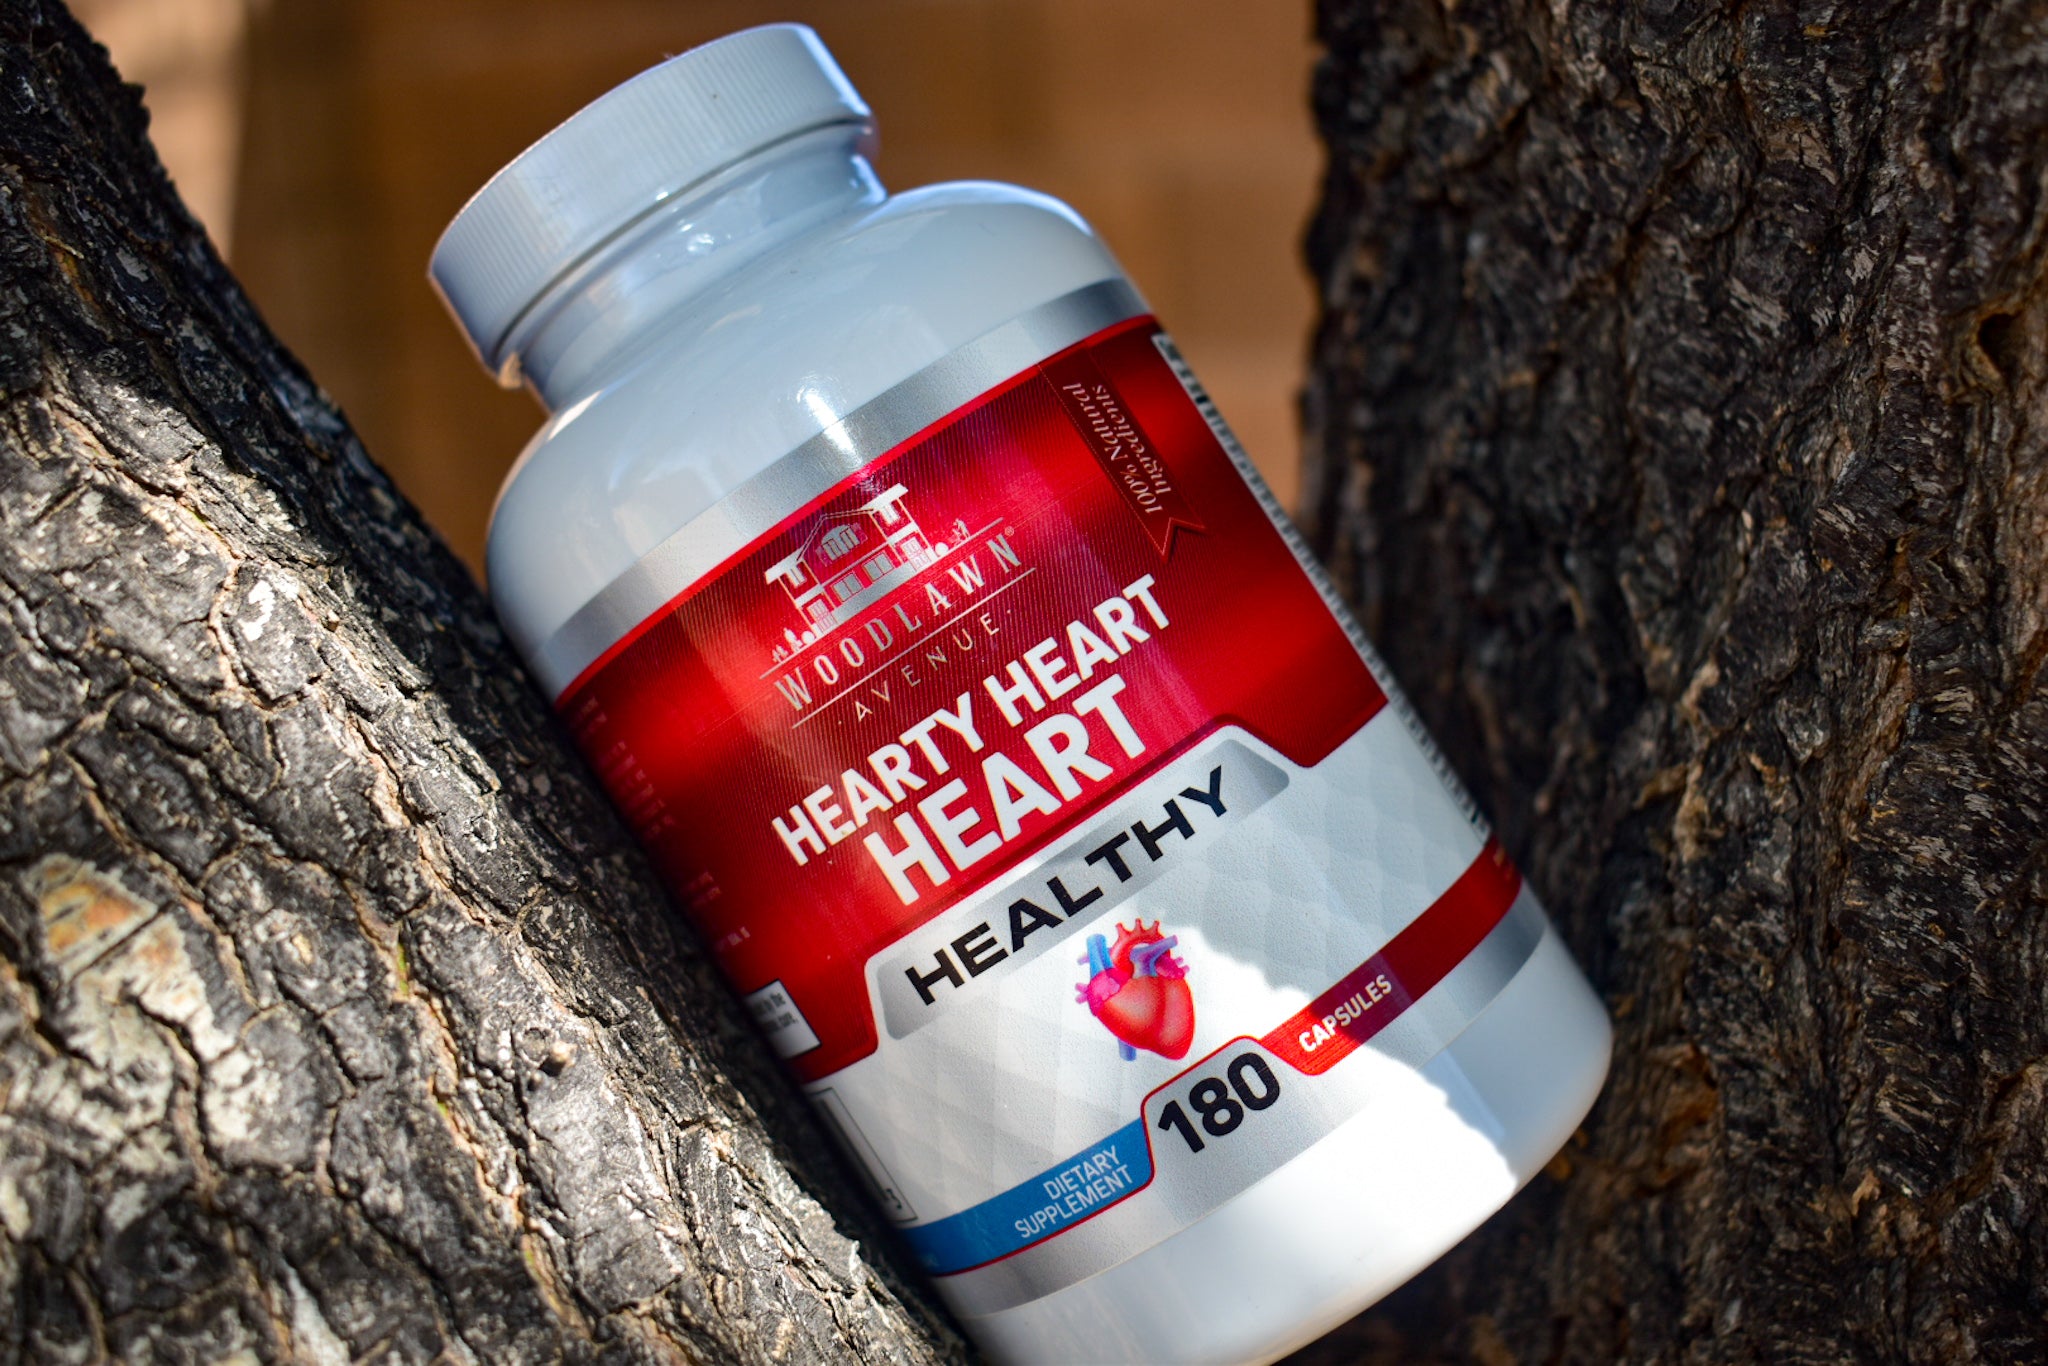 Hearty Heart Heart - Heart Healthy Formula Heart Health and Blood Pressure Support. Improves Healthy Cardiovascular Function.